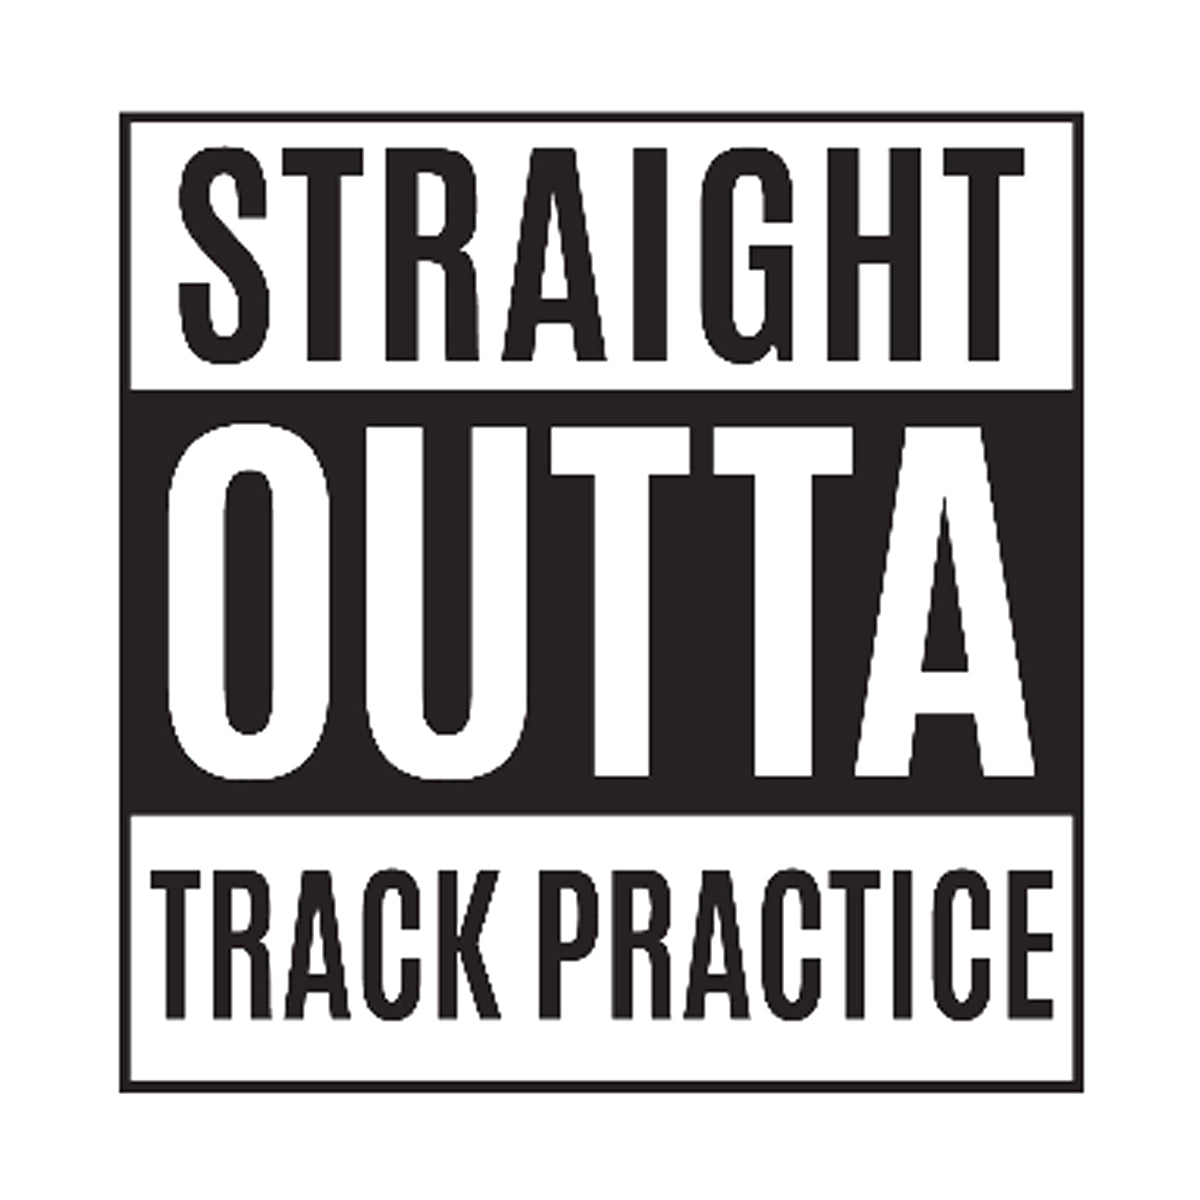 Straight Outta Track Practice Printed Tee Humorous Shirt 411 